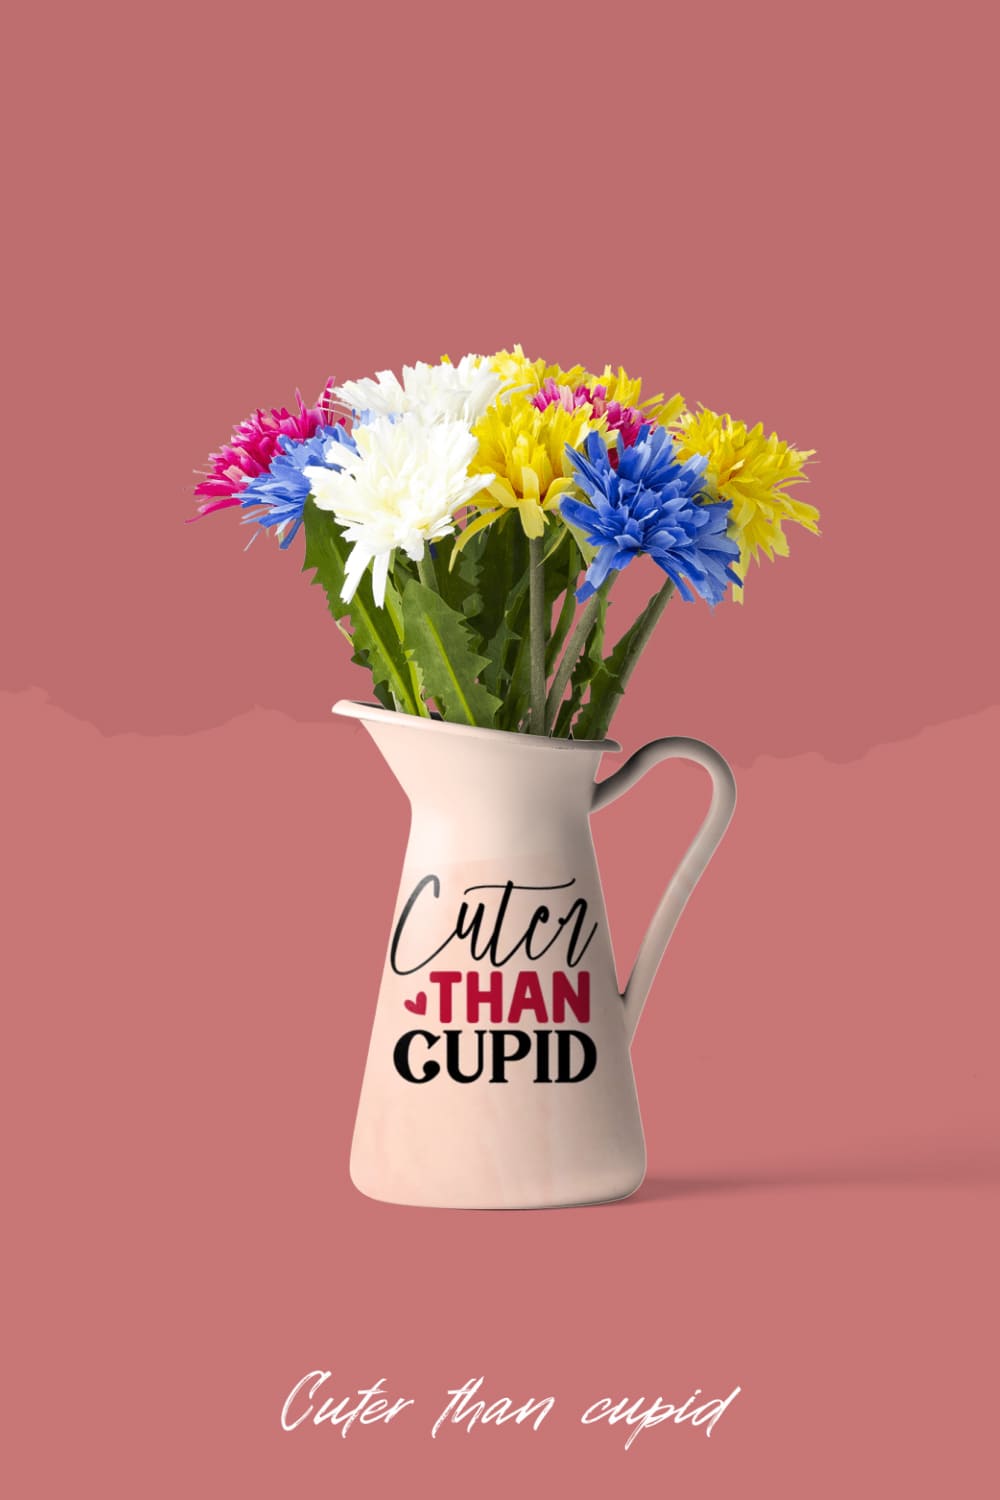 Cuter than cupid - pinterest image preview.